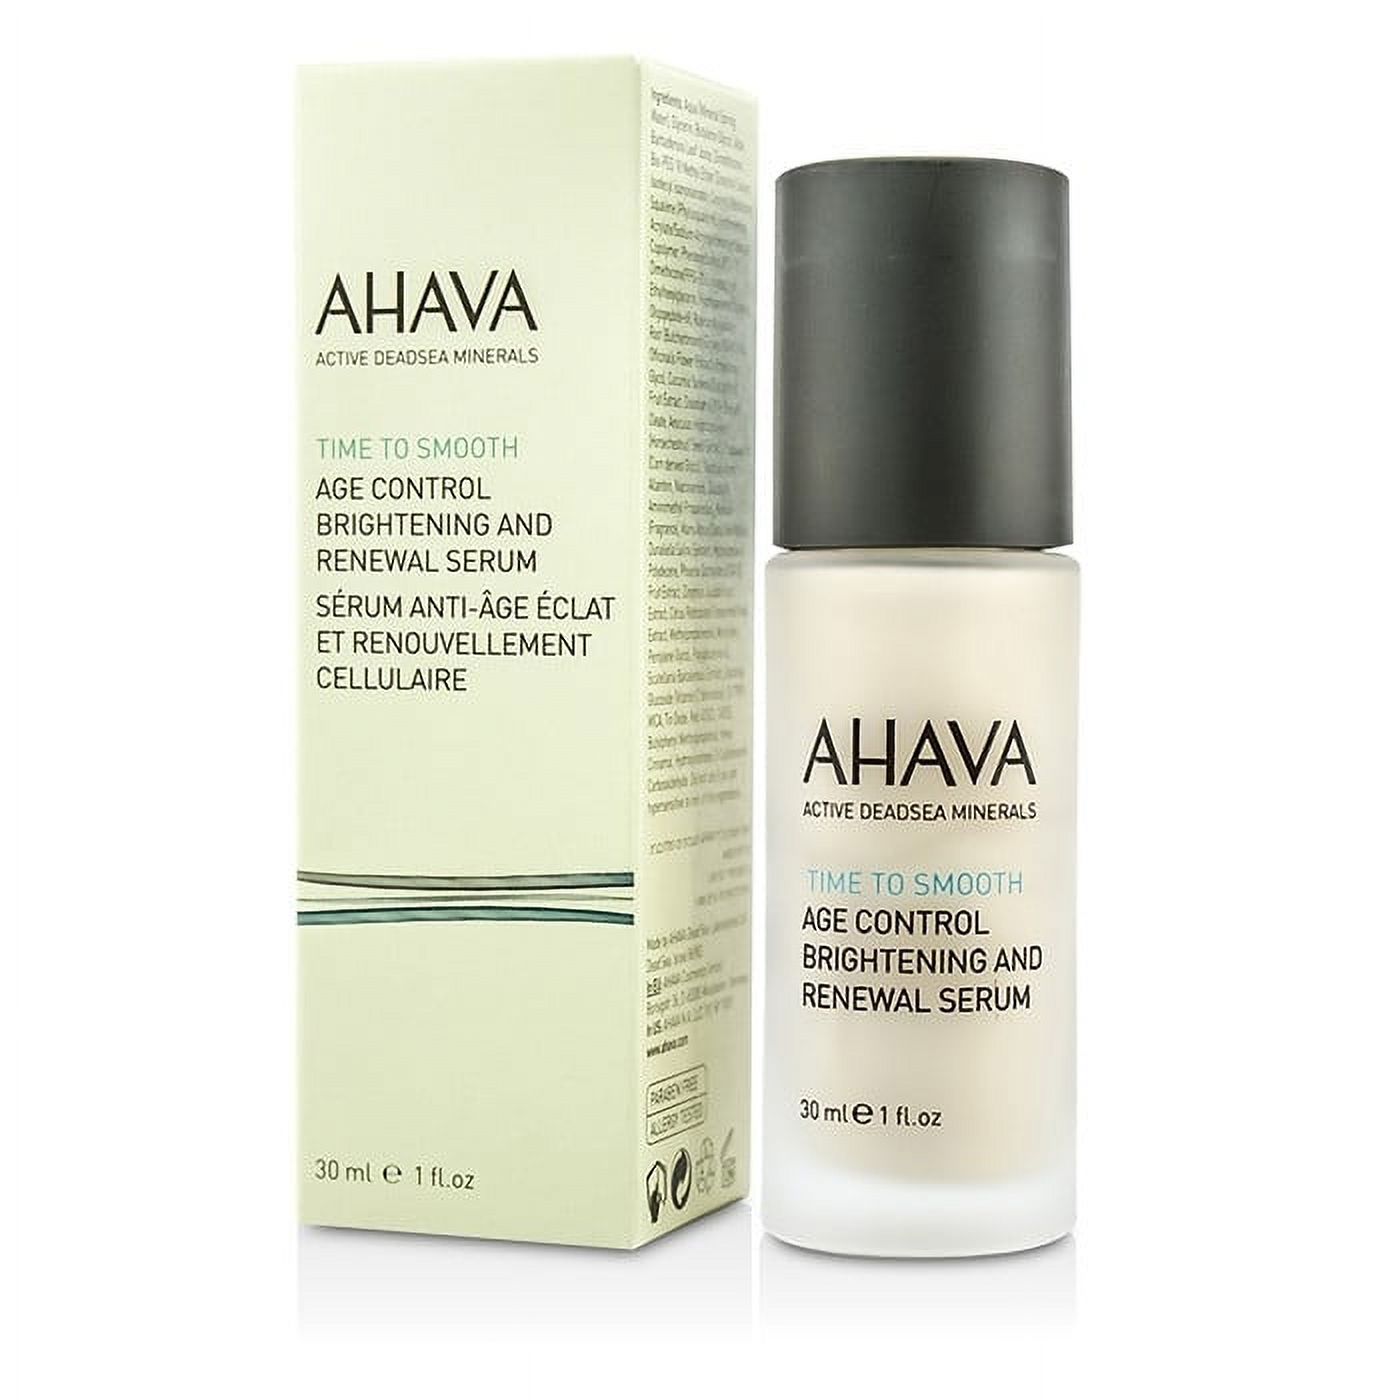 Ahava - Time To Smooth Age Control Brightening and Renewal Serum(30ml/1oz) - image 1 of 4